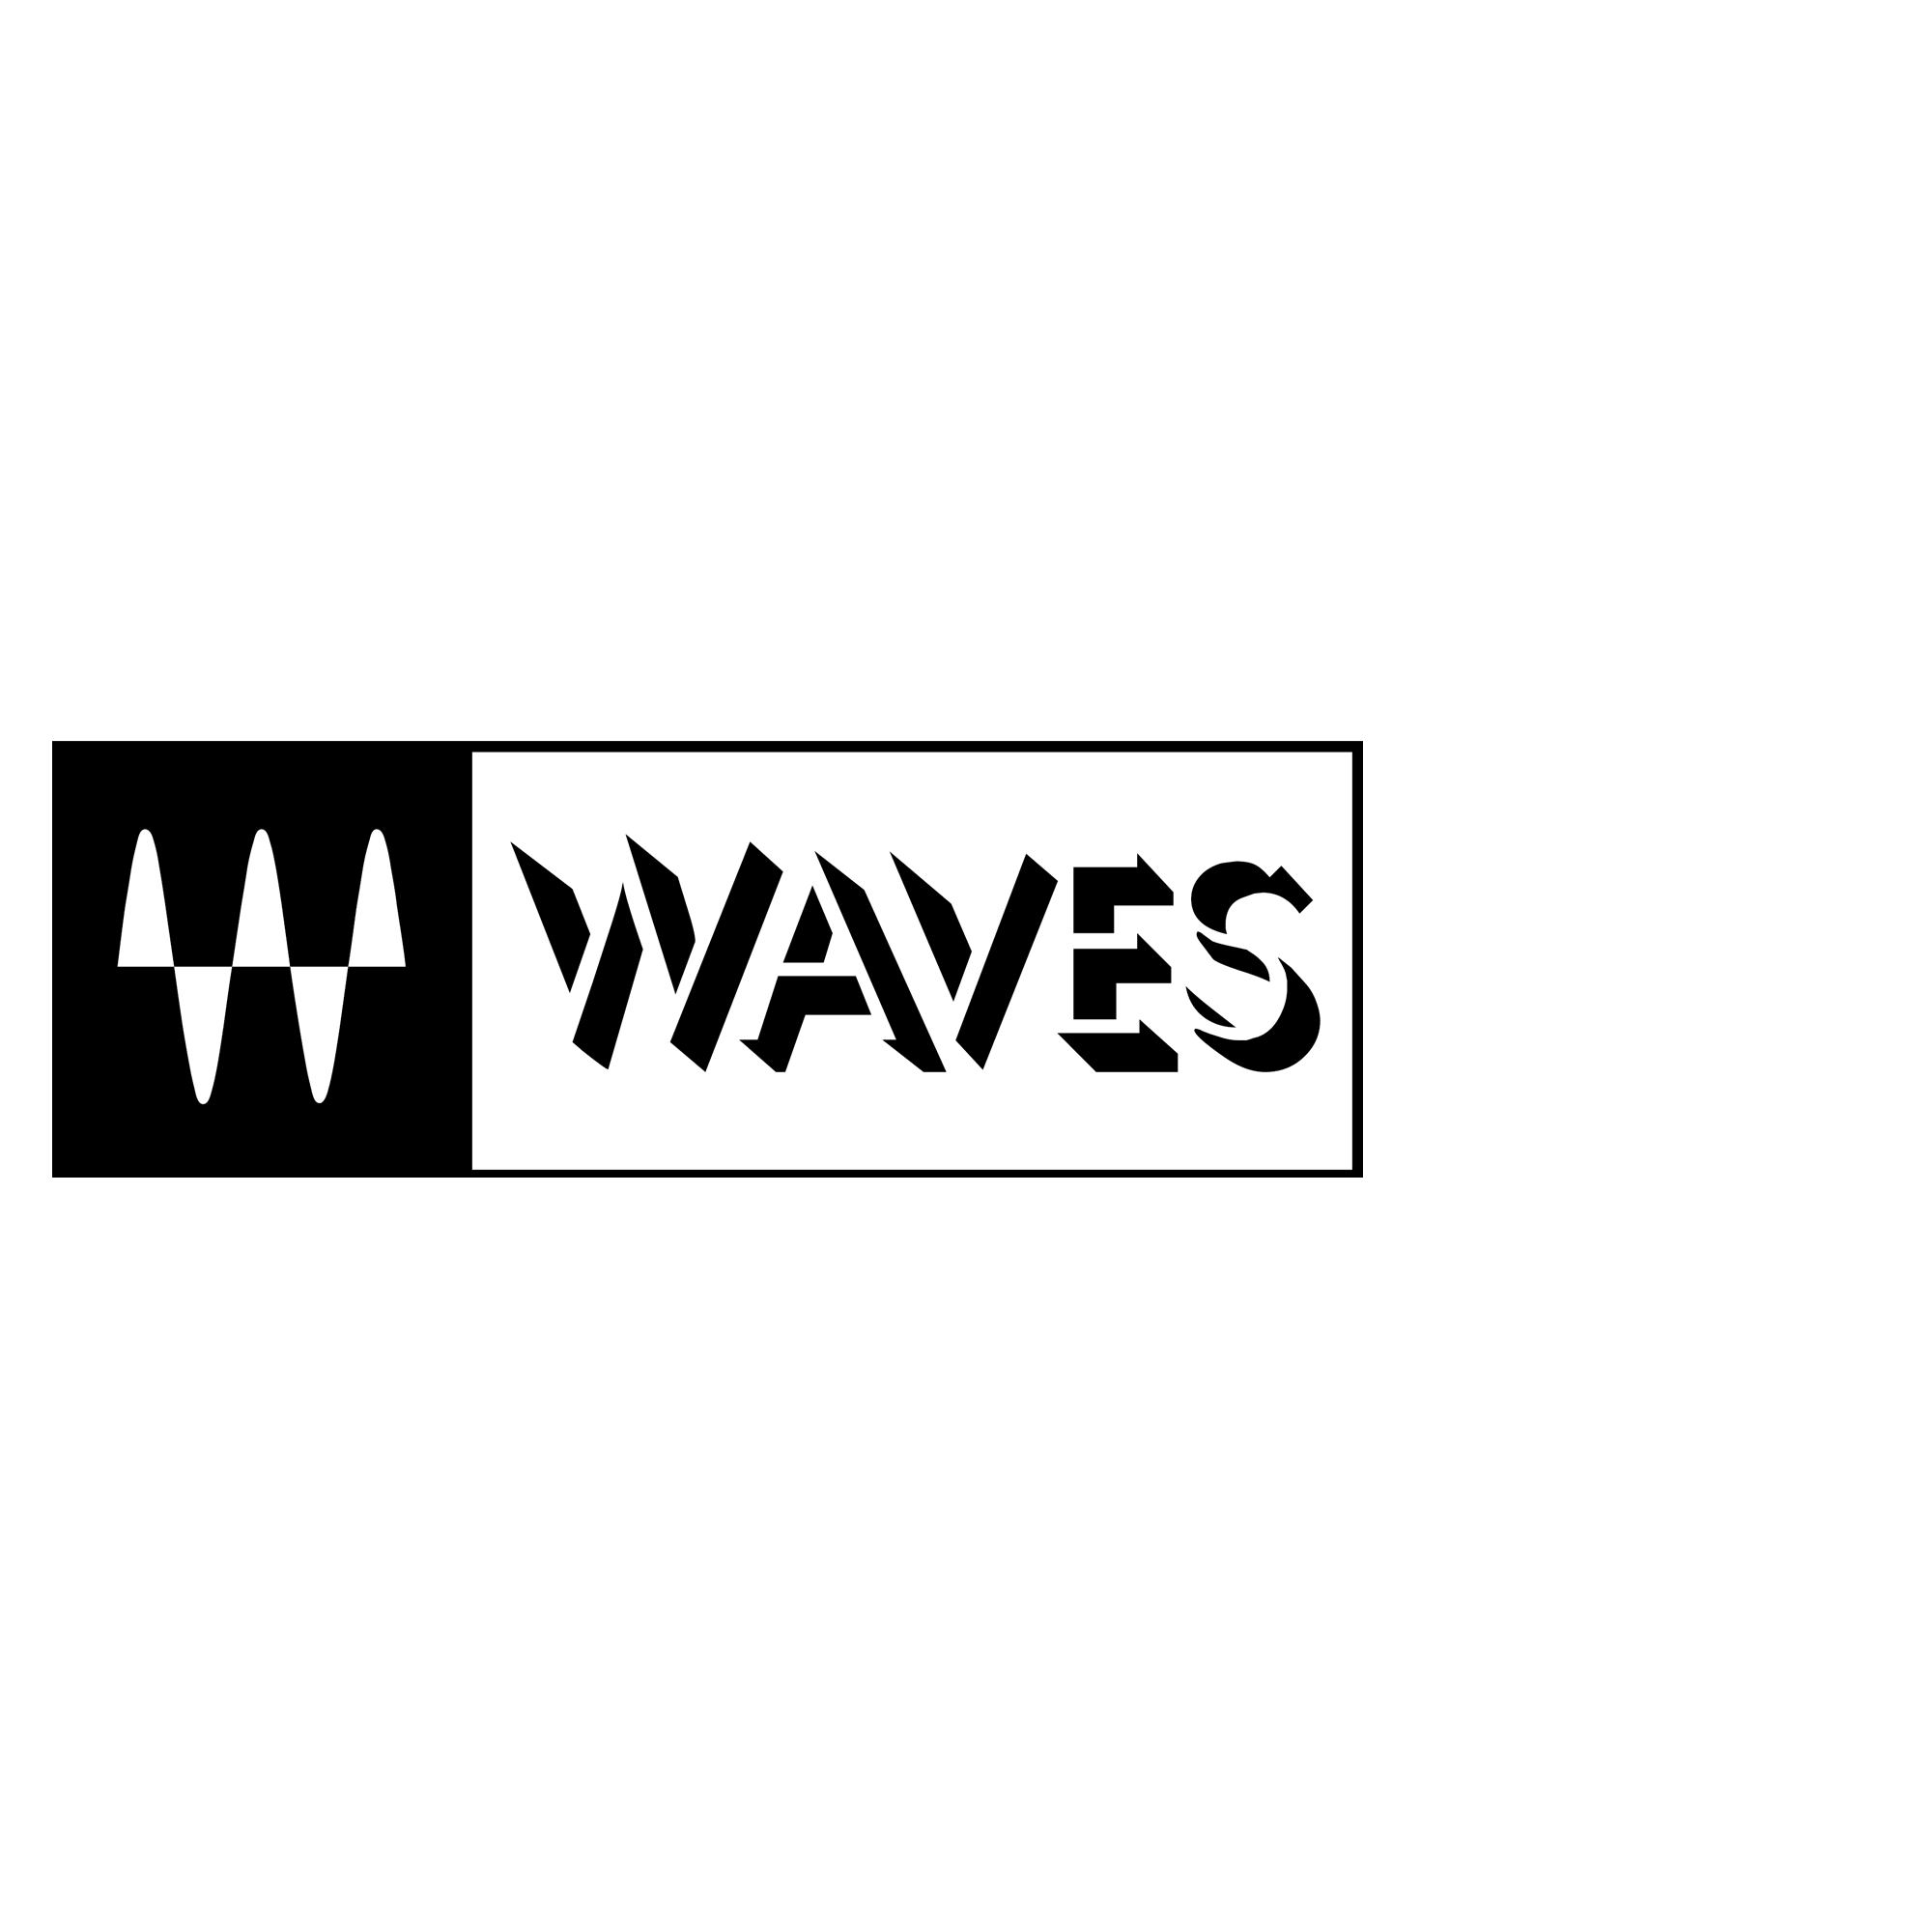 Waves Feels Competition, Economy Reduces Prices